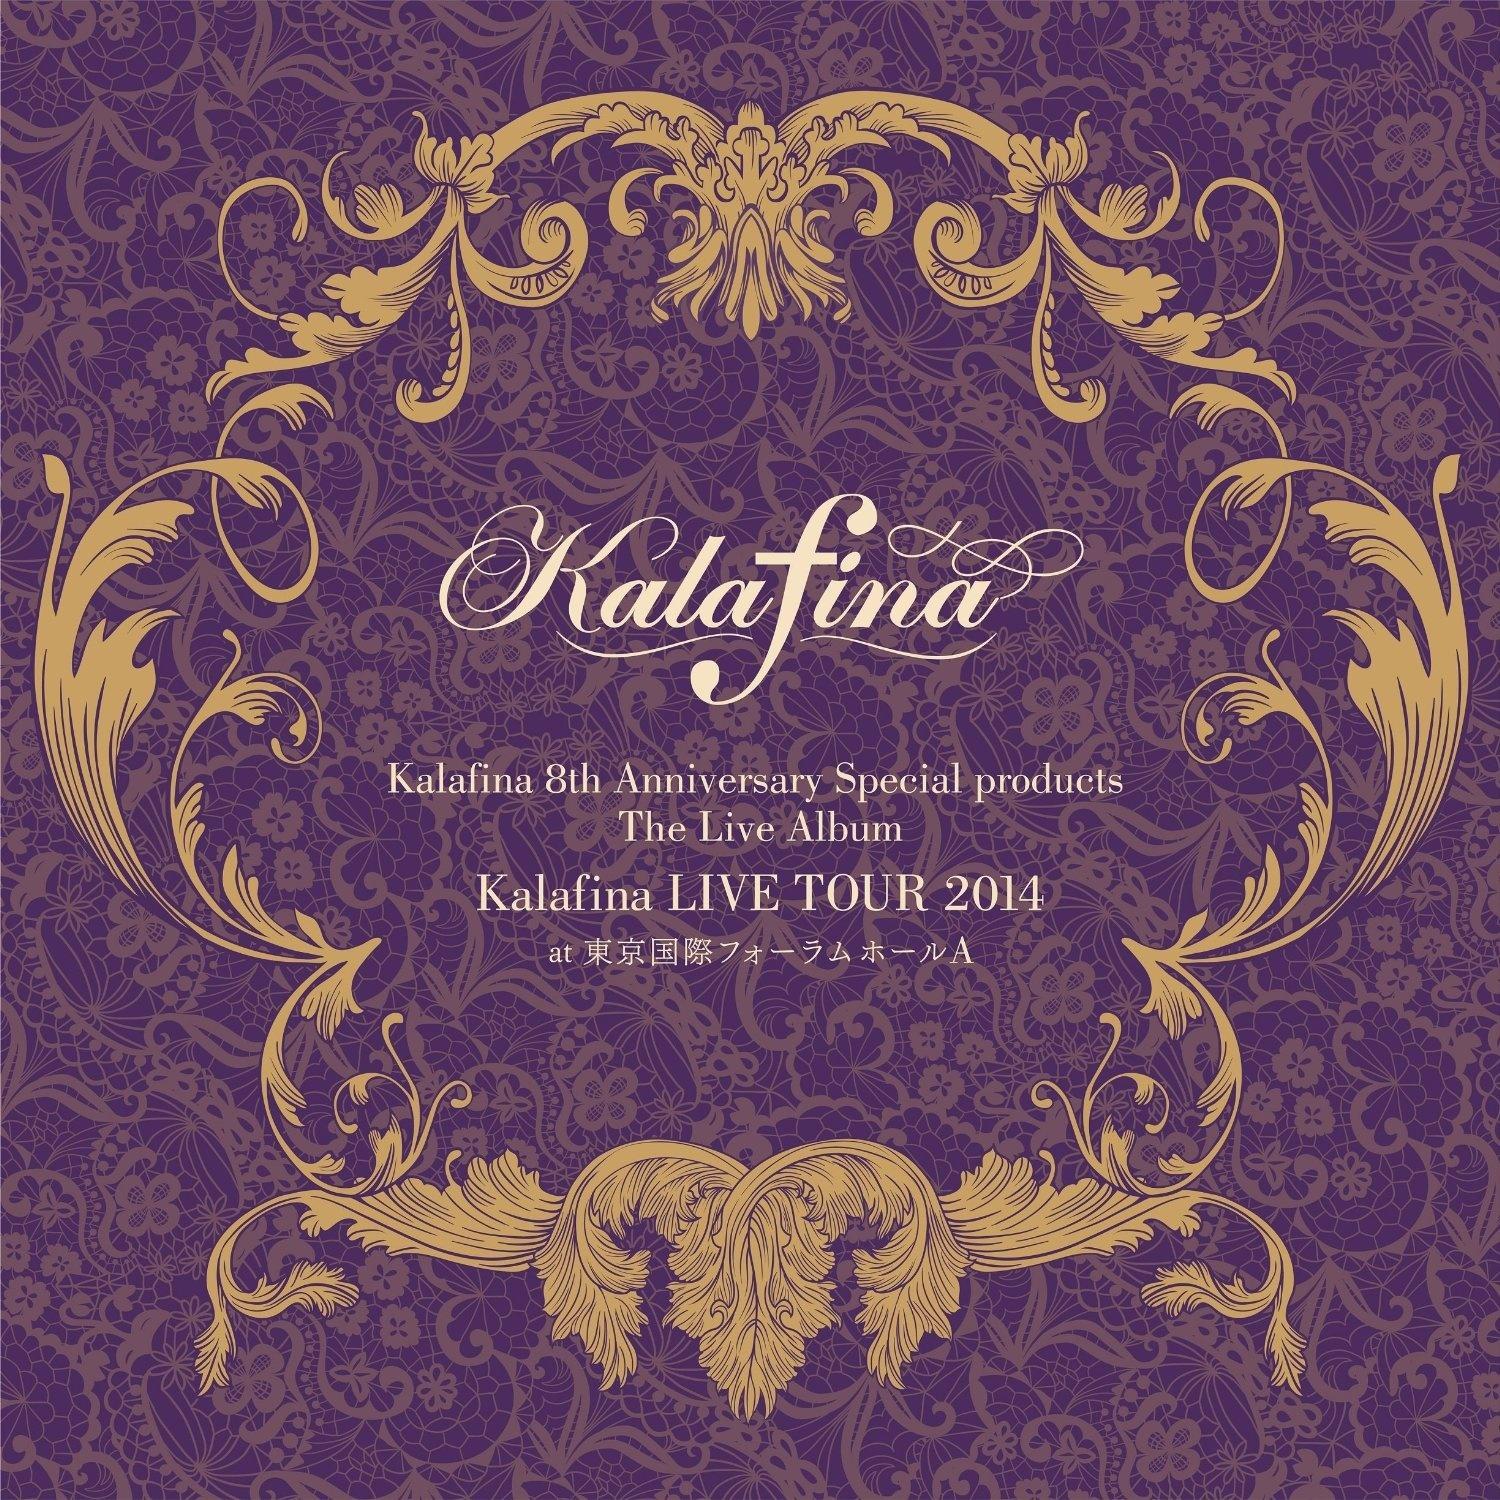 Kalafina 8th Anniversary Special products The Live Album「Kalafina LIVE TOUR 2014」 at 東京国際フォーラム ホールA专辑